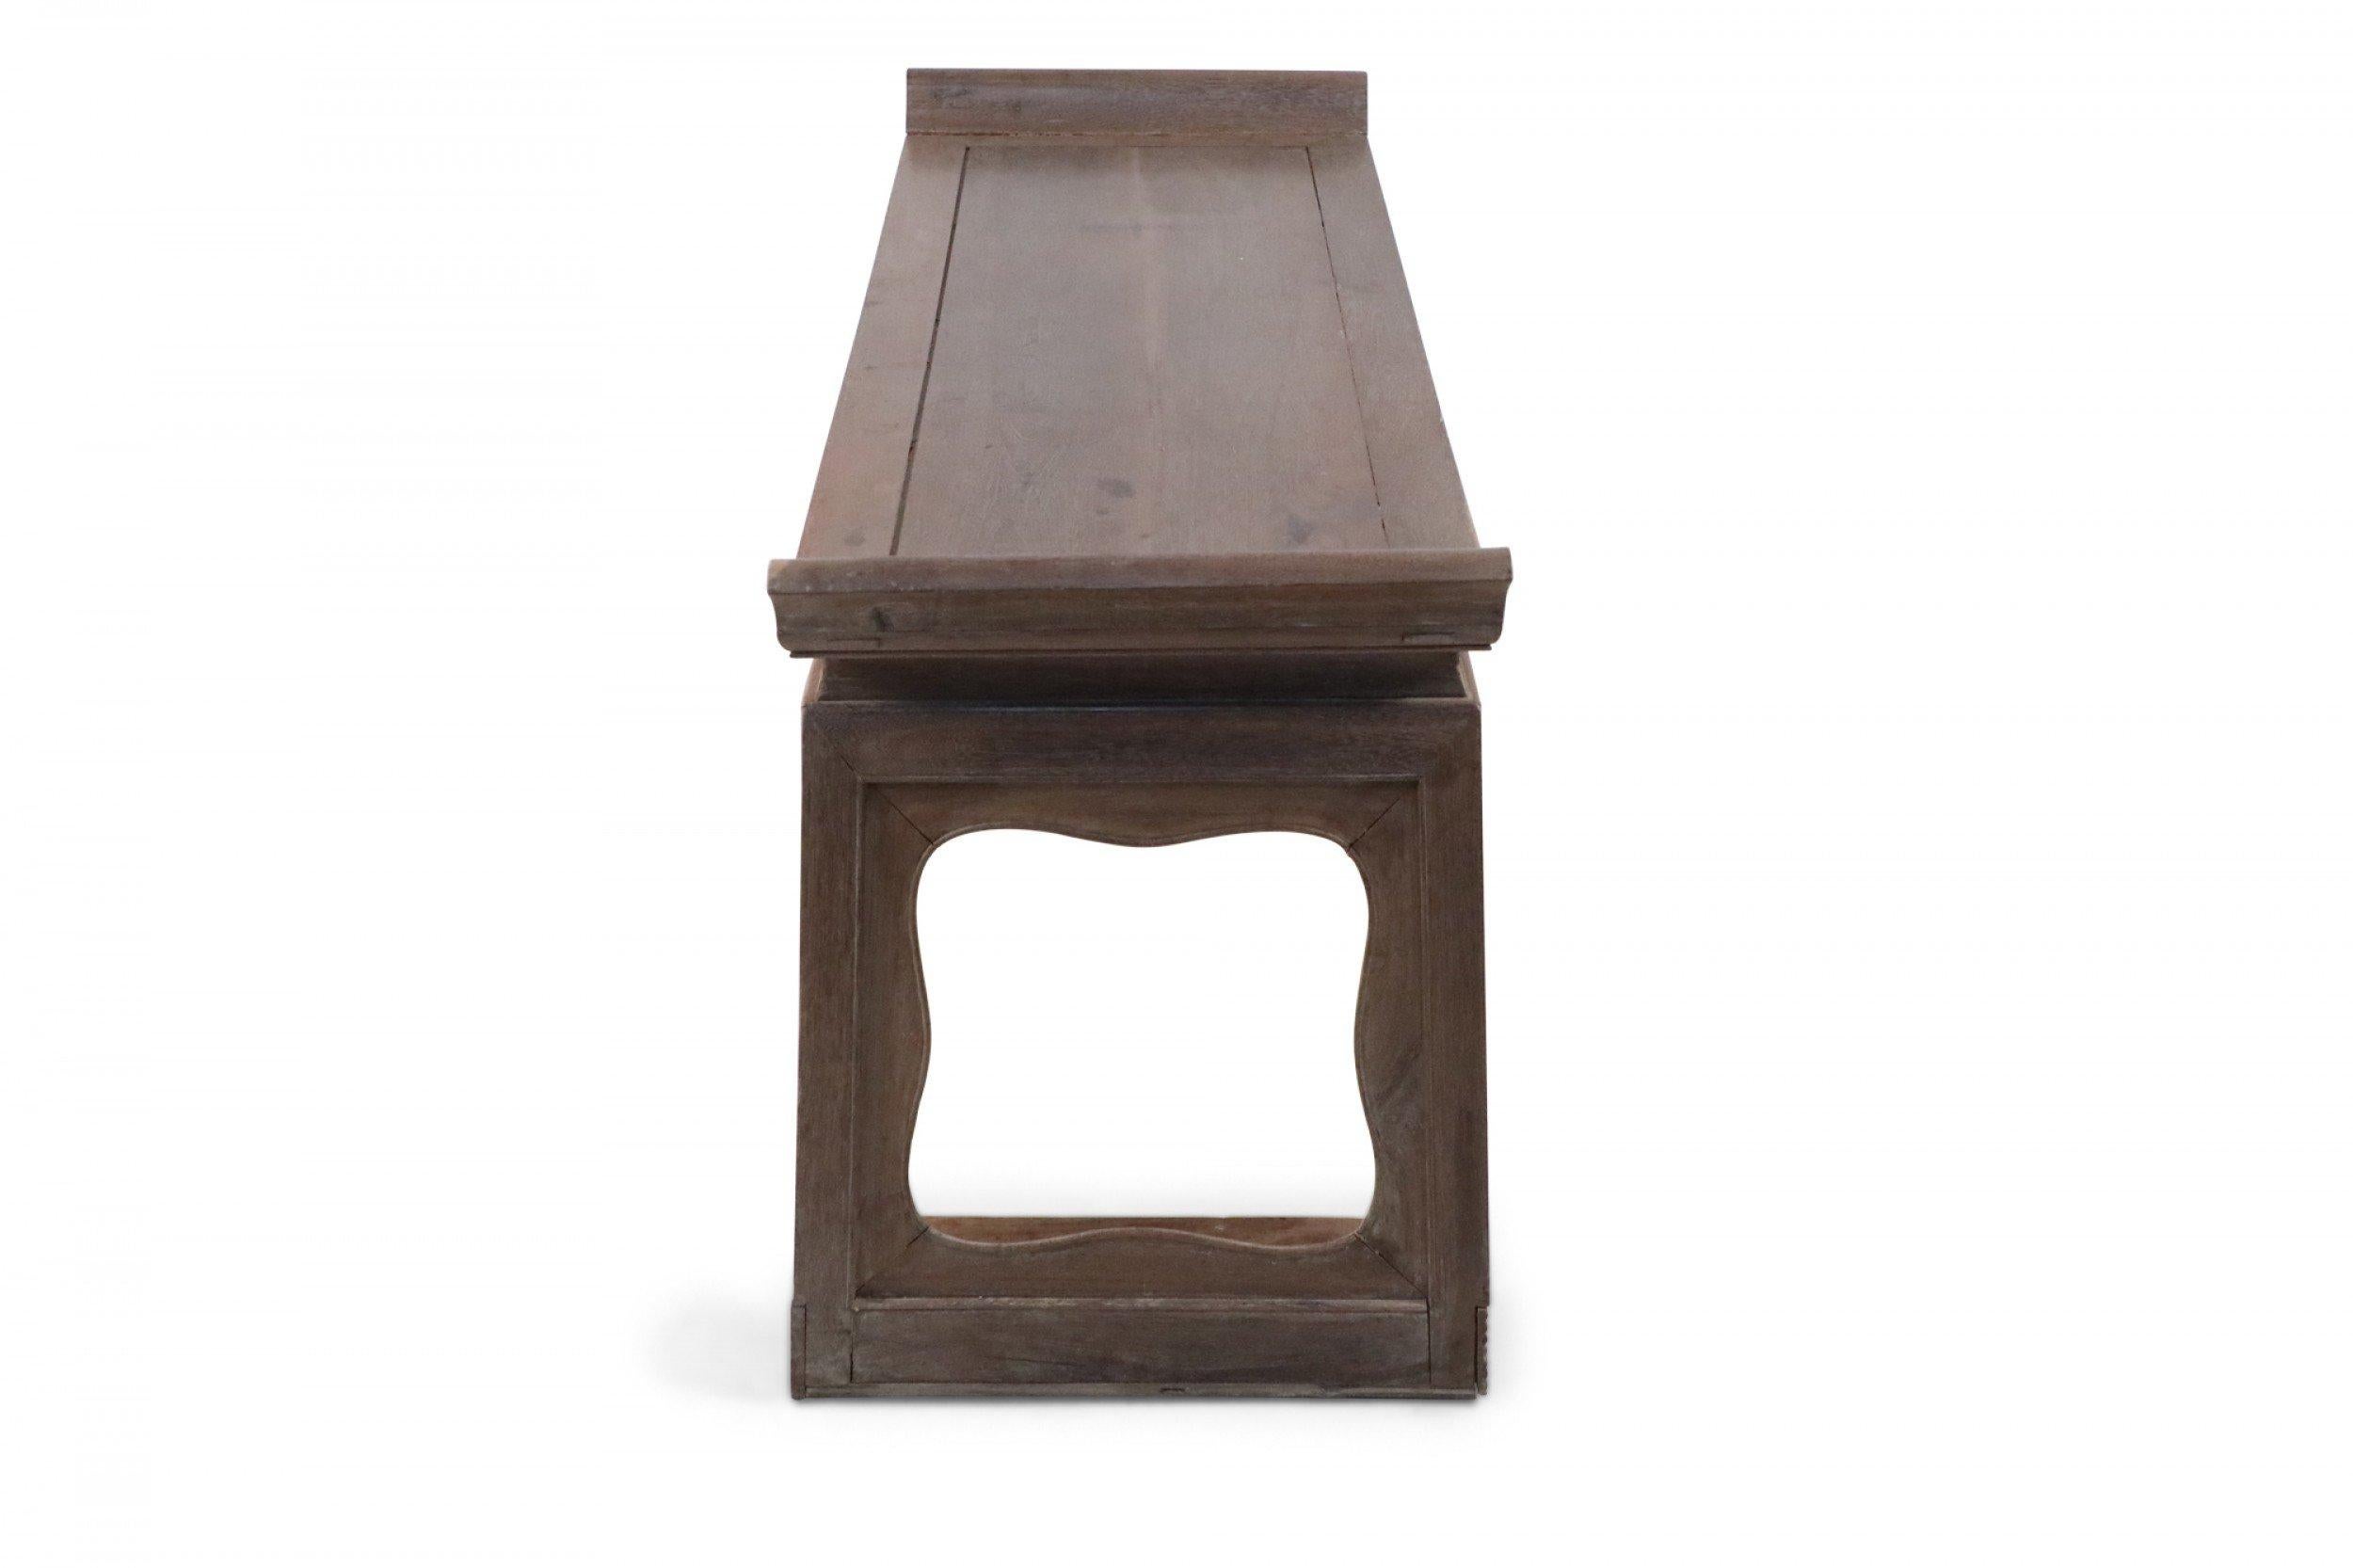 Antique Chinese (Early 19th Century) low narrow hardwood table or bench with a smooth, top slanting upward at each end, supported by two legs with subtly-scalloped cutouts.